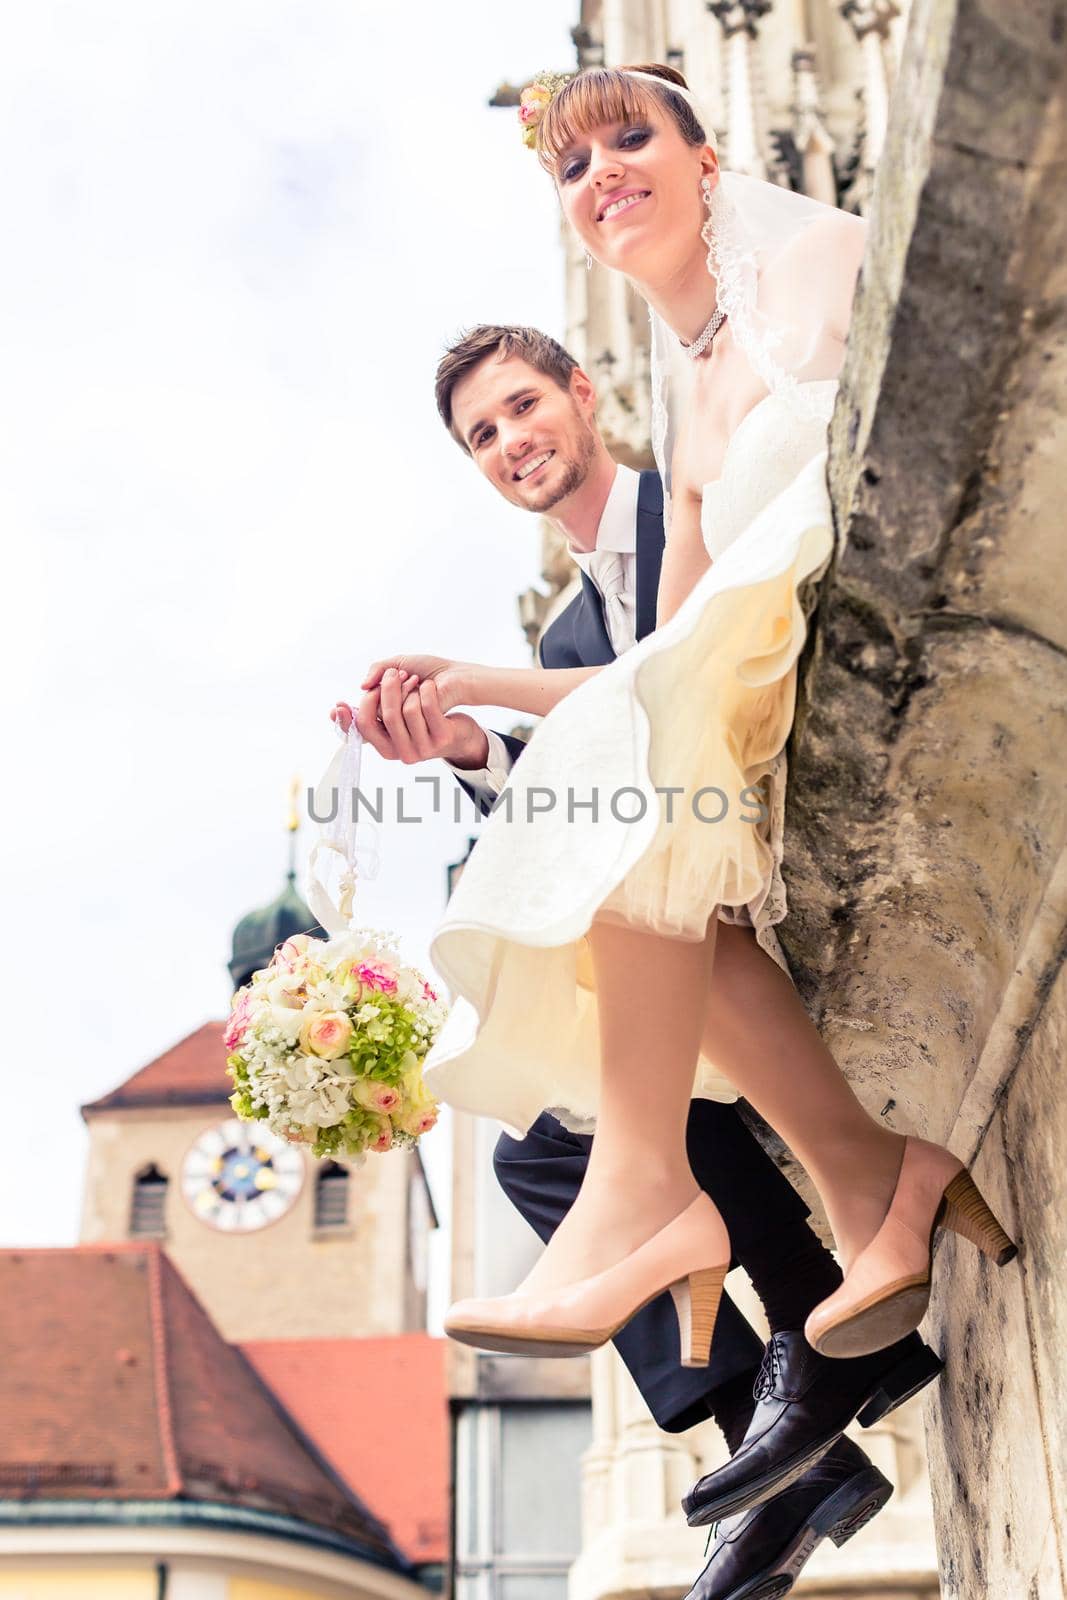 Smiling young married couple holding flower bouquet at outdoors